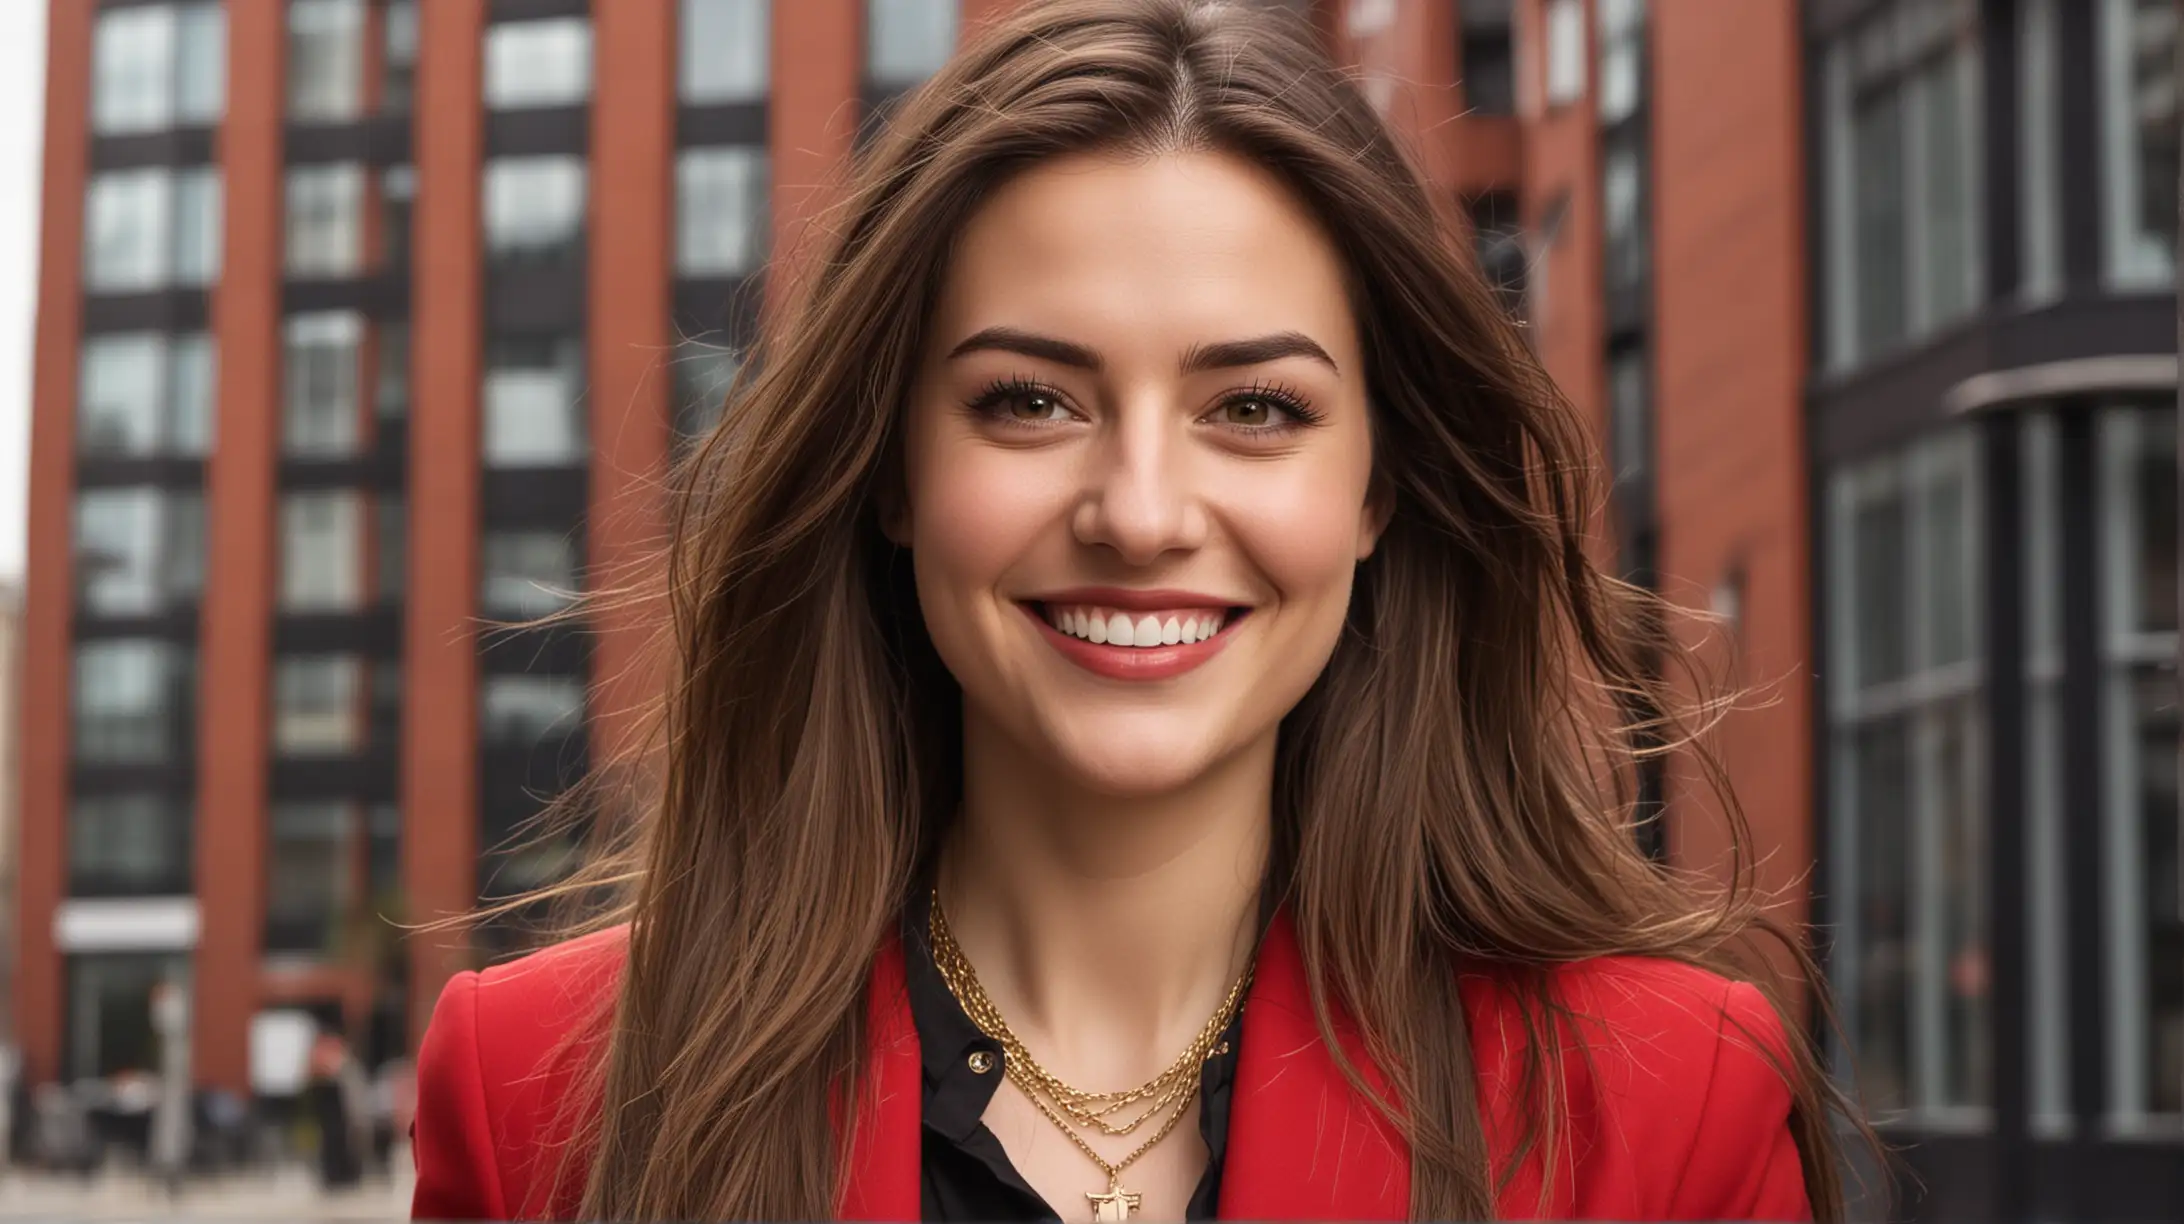 High rise urban background, 30 year old pale white woman with long dark brown blowout straight hair parted to the right, big eyelashes, red blazer, gold necklace, black shirt and black trousers, smiling. She might be of English or Irish or Danish descent.